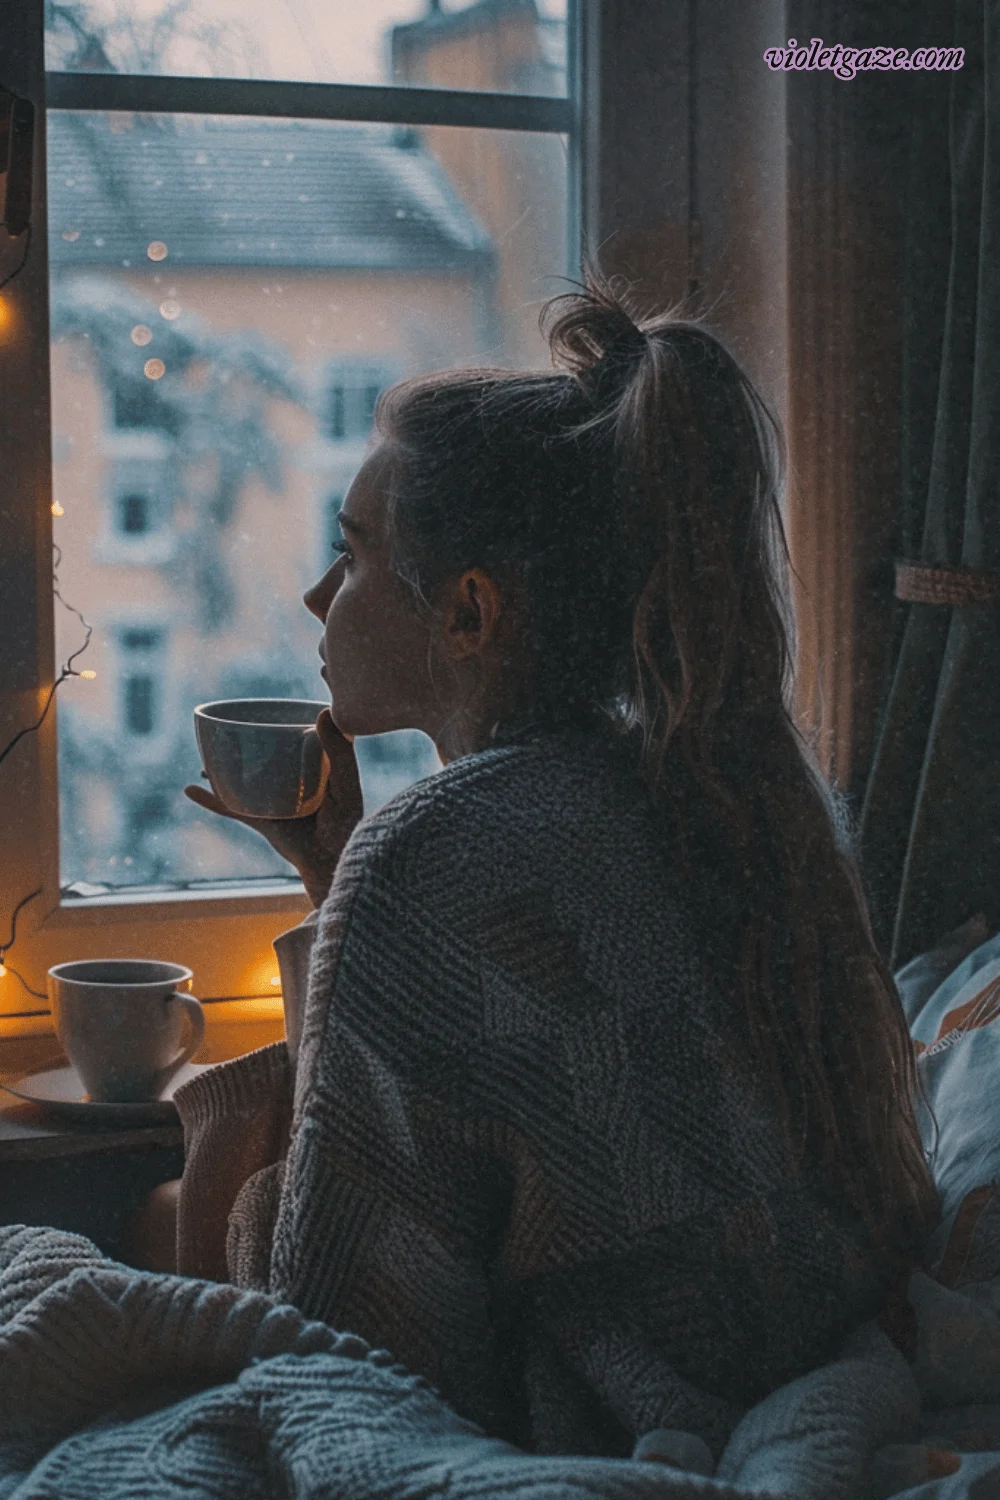 image of a girl looking out the window sipping tea